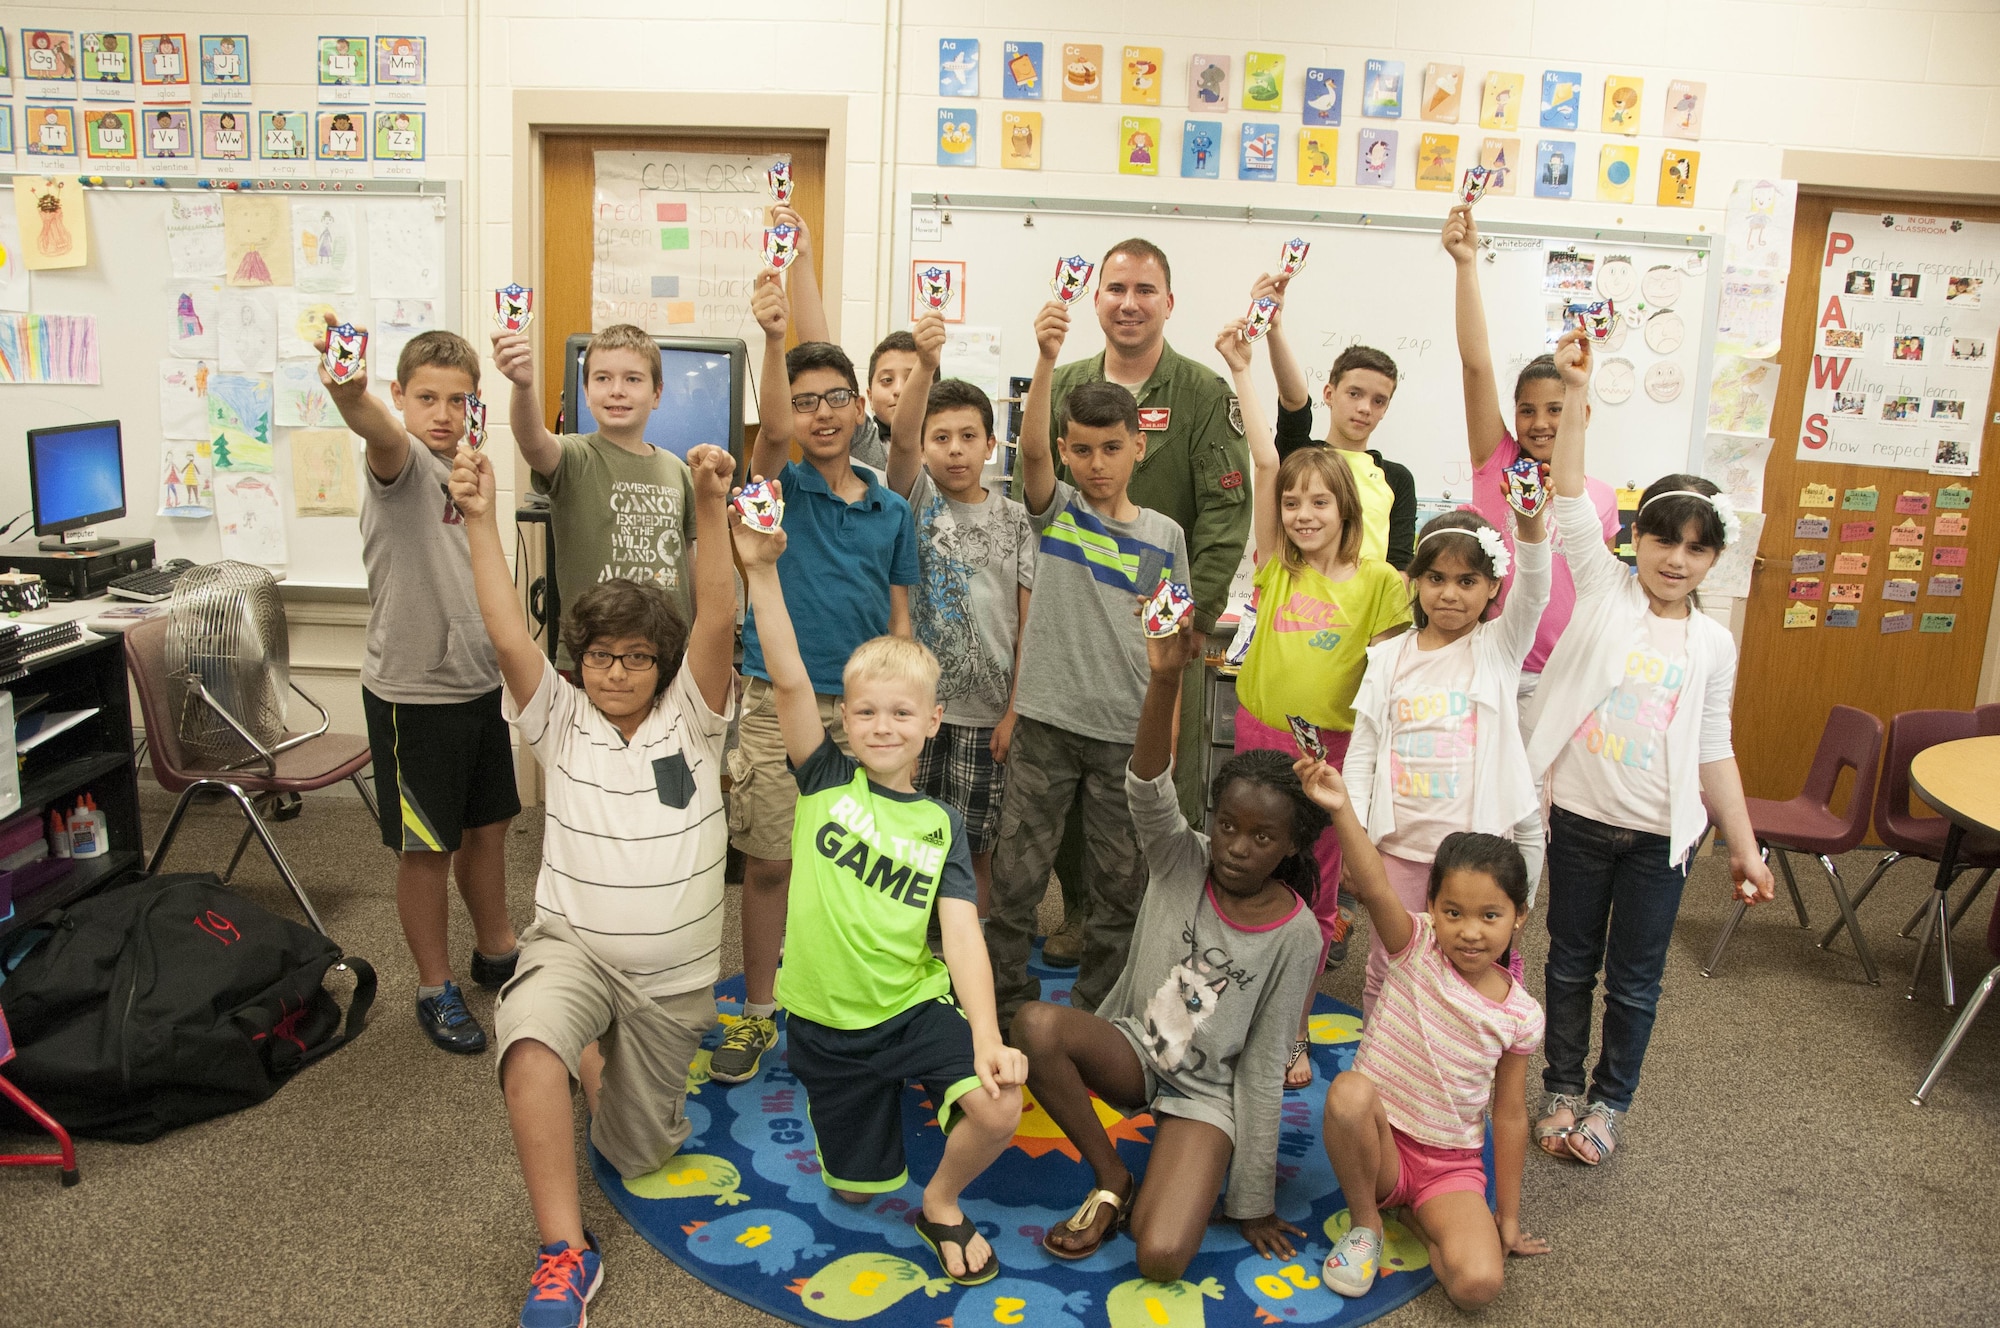 Col. Tom Bladen, 104th Fighter Wing operations group commander, visits refugee students at Highland Elementary School in Westfield, Massachusetts, June 26, 2017. The students received a 104th Fighter Wing patch and raised the patch up high while taking a photo with Col. Bladen after hearing about the 104th Fighter Wing mission to protect and serve. The visit served as a means to help the children understand why they hear the loud screeching F15 jets flying overhead when playing outside and to help them understand the 104th Fighter Wing flies to protect. Bladen speaks to the students about the F-15 Eagle and explains to the refugee students on how the pilots practice a lot just as soccer players practice. (U.S. Air National Guard photo by Senior Master Sgt. Julie Avey)